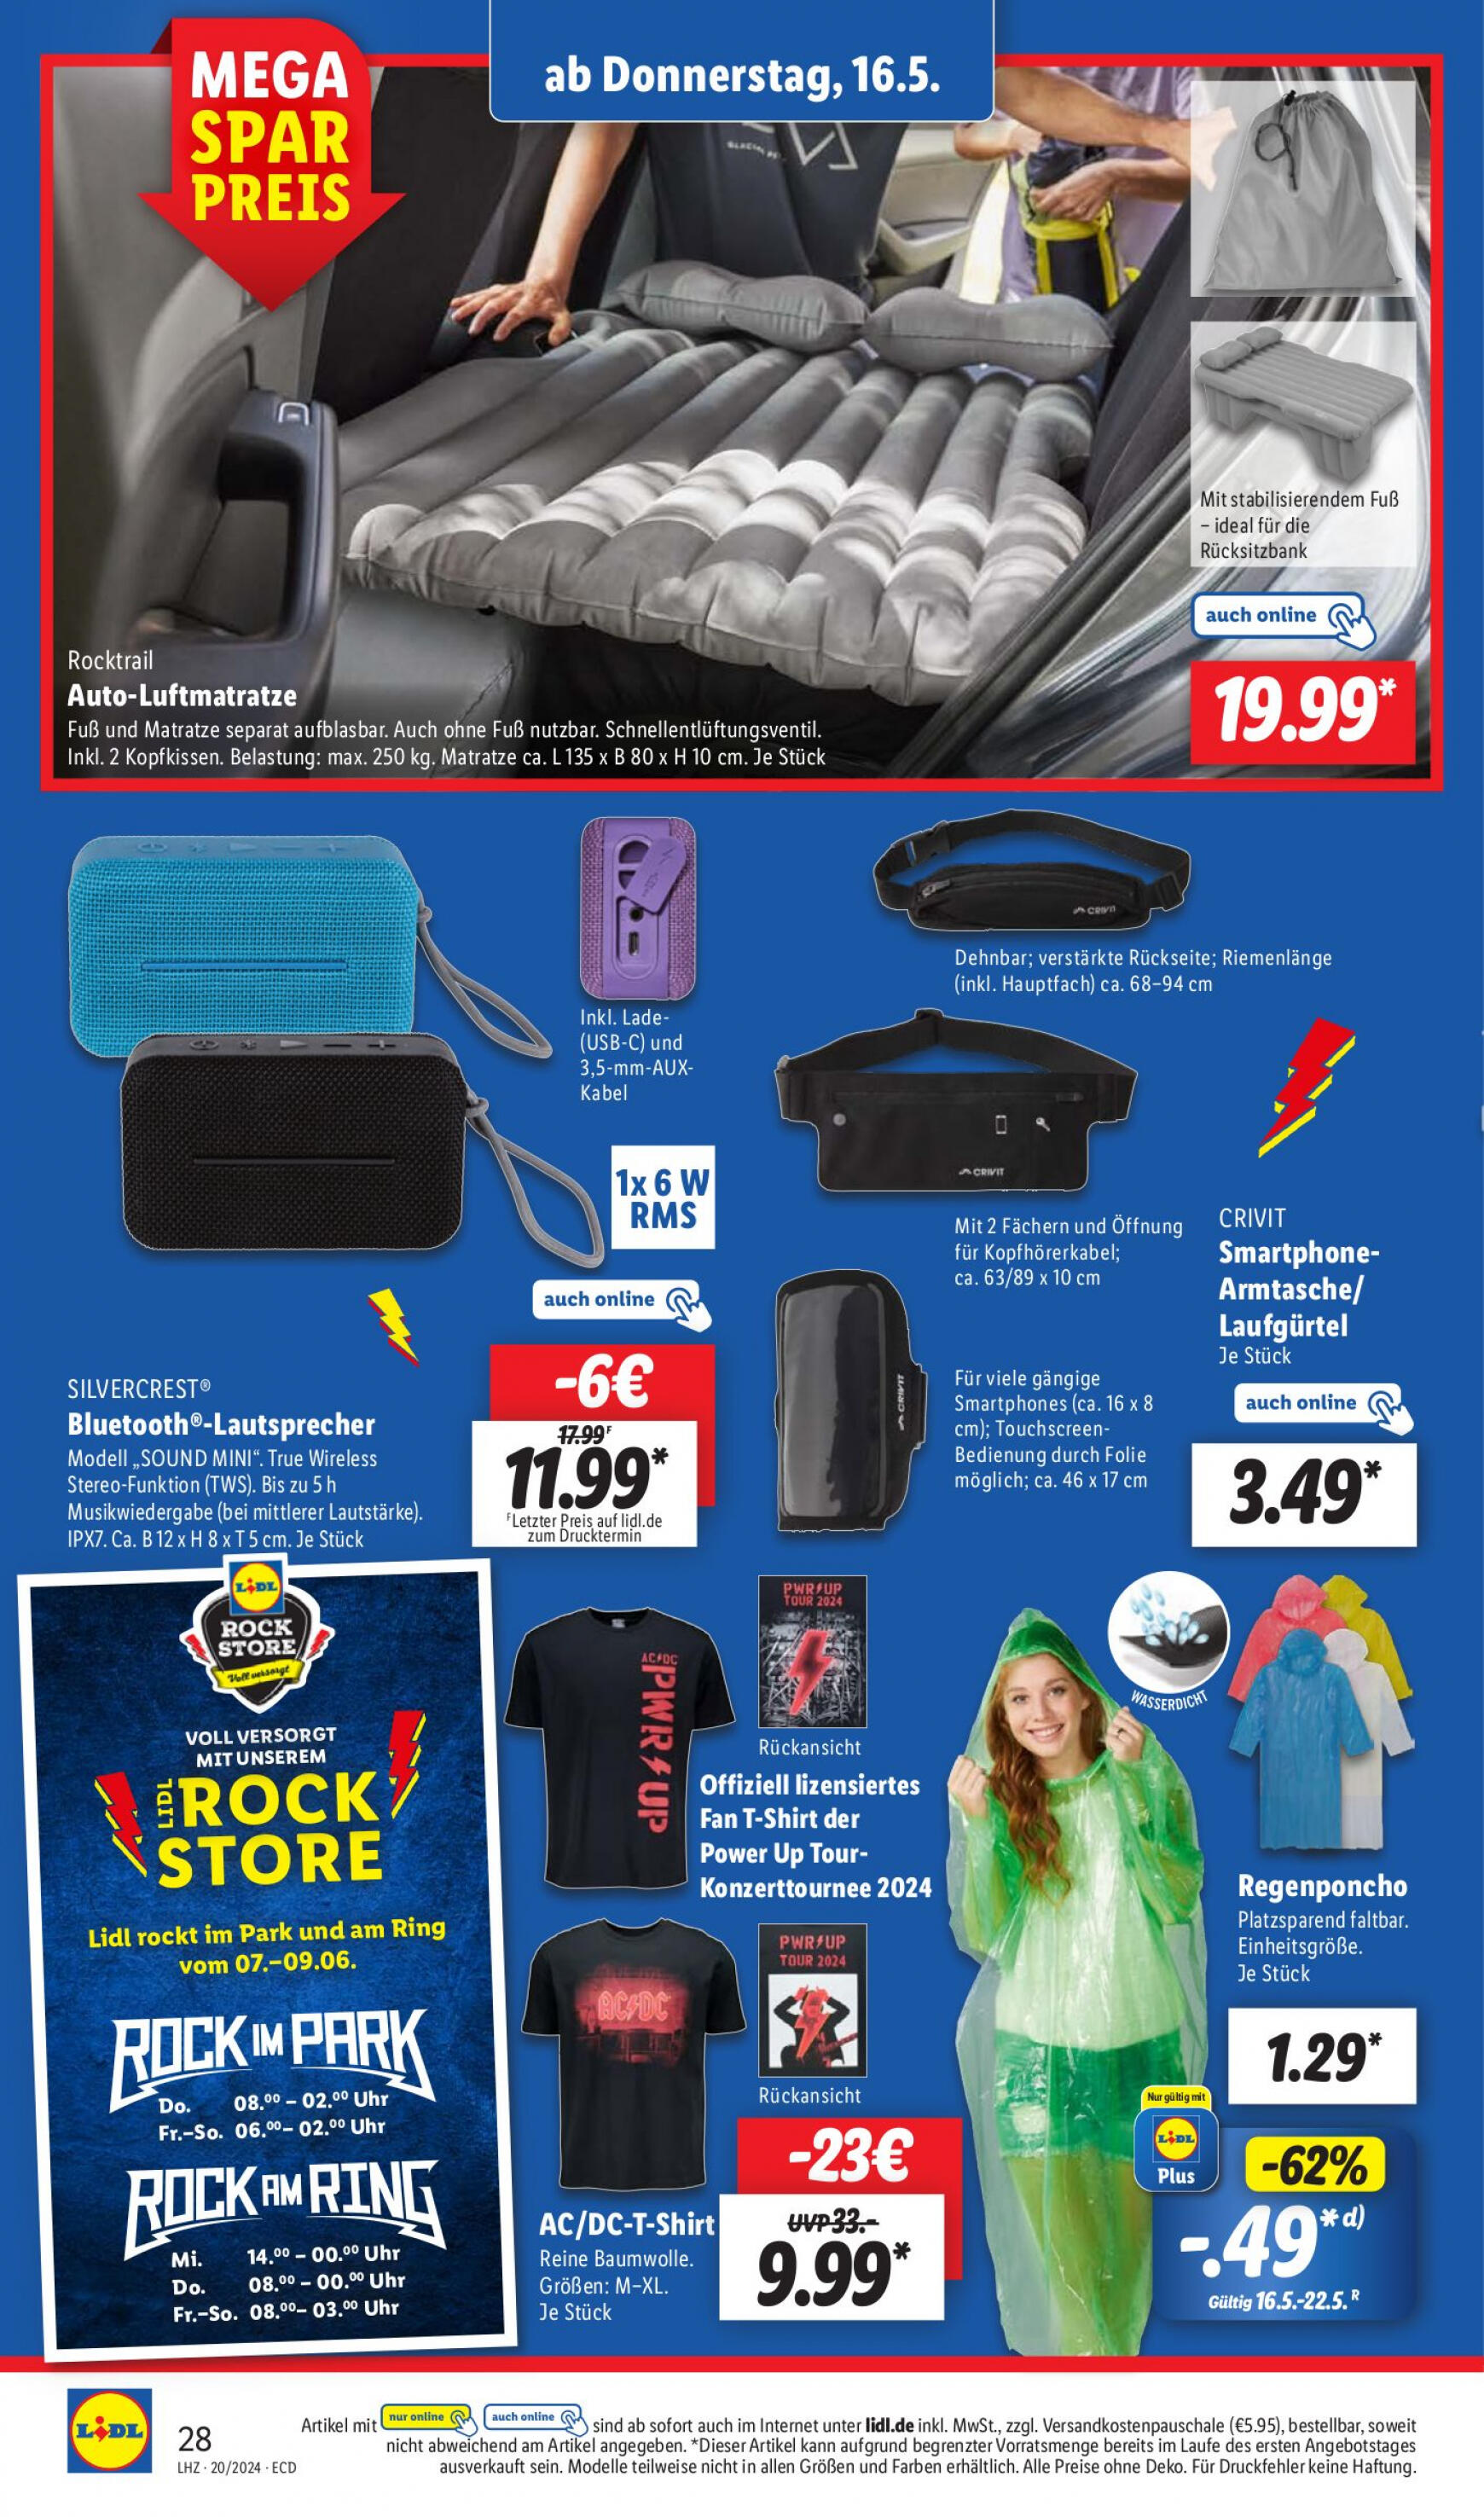 lidl - Flyer Lidl aktuell 13.05. - 18.05. - page: 34